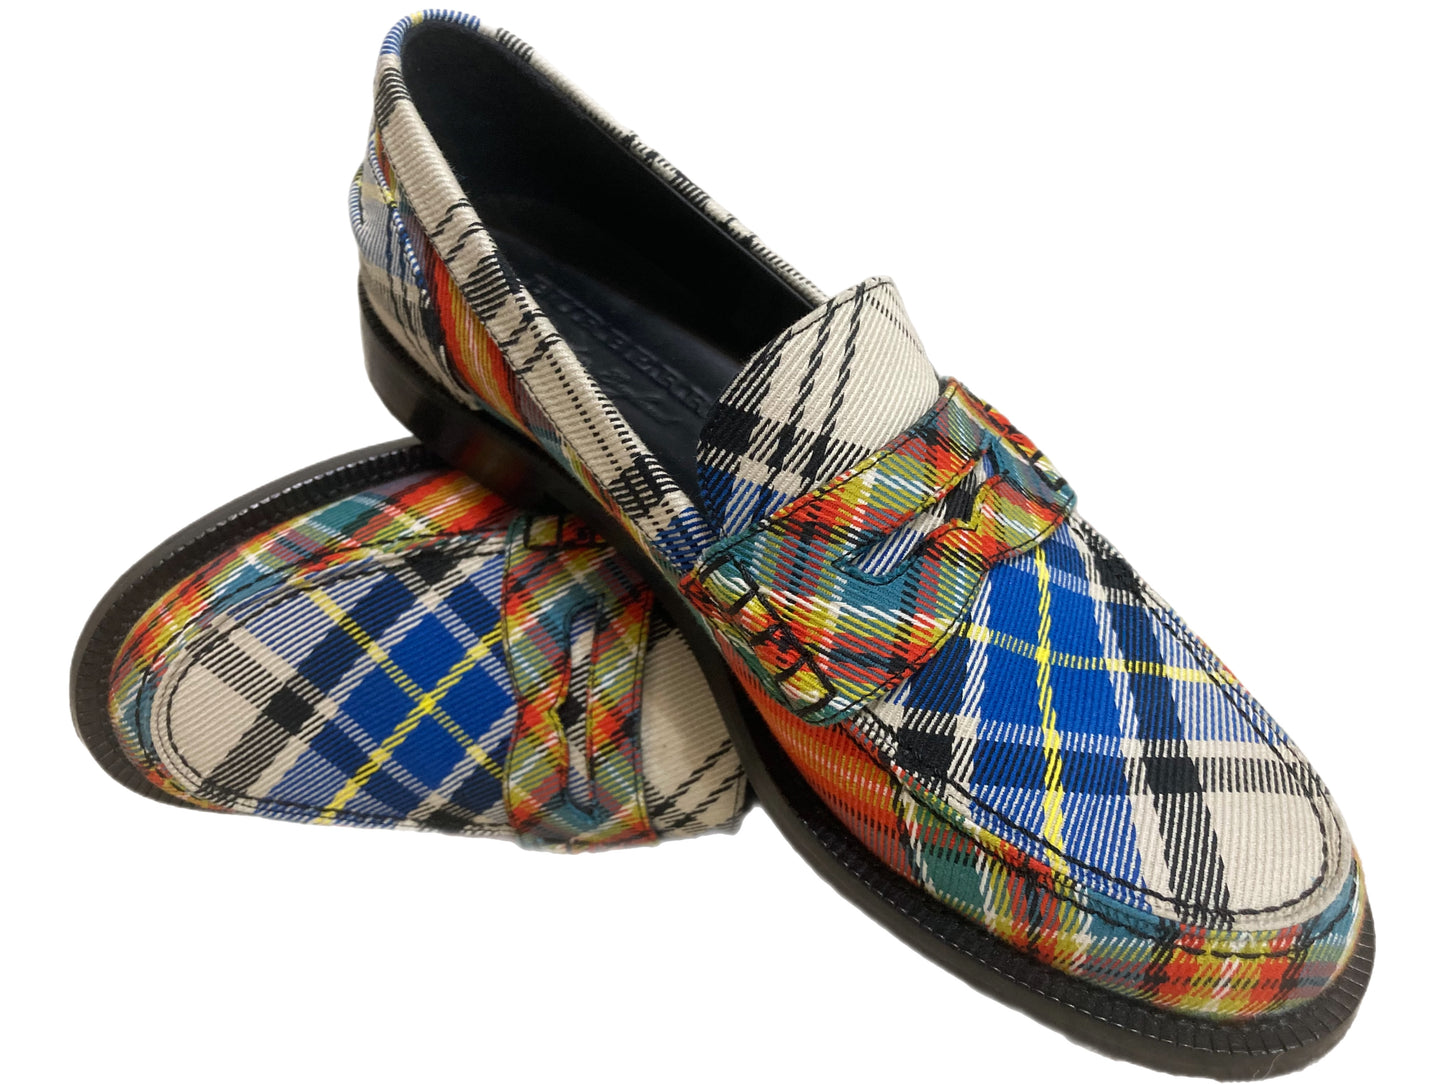 BURBERRY Plaid Loafers Multi-Color Size 38.5